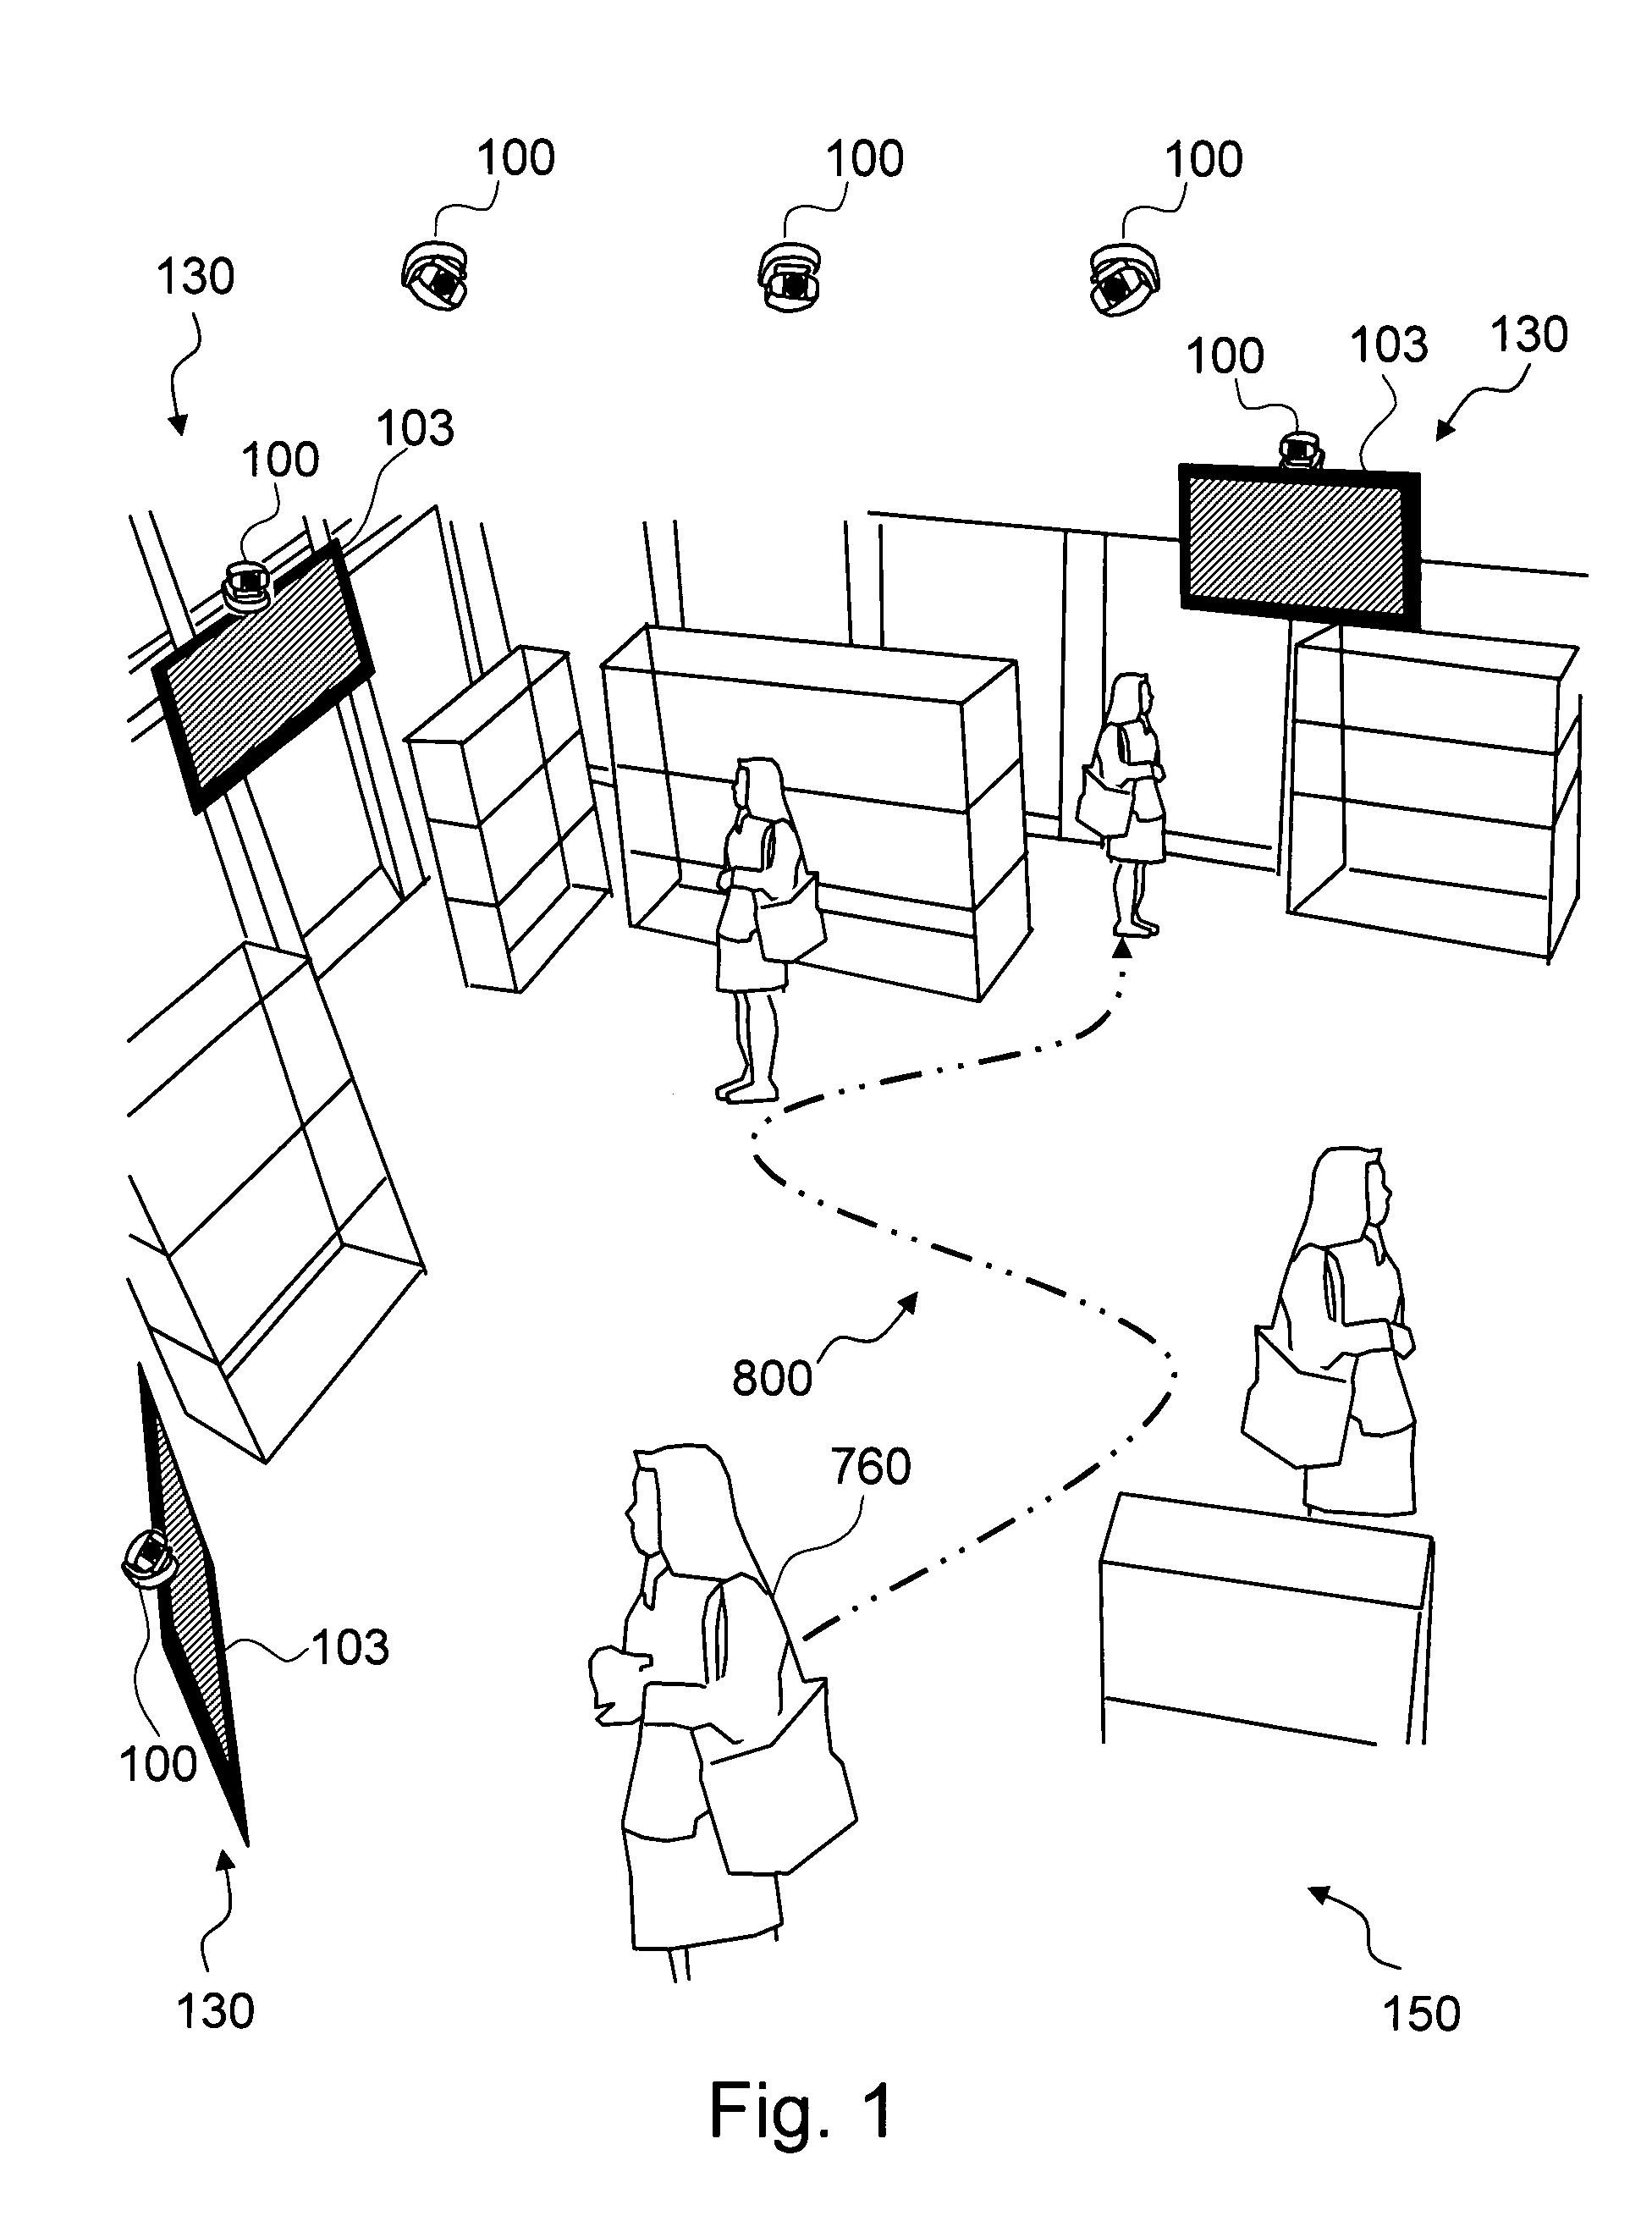 Method and system for automatically measuring and forecasting the behavioral characterization of customers to help customize programming contents in a media network